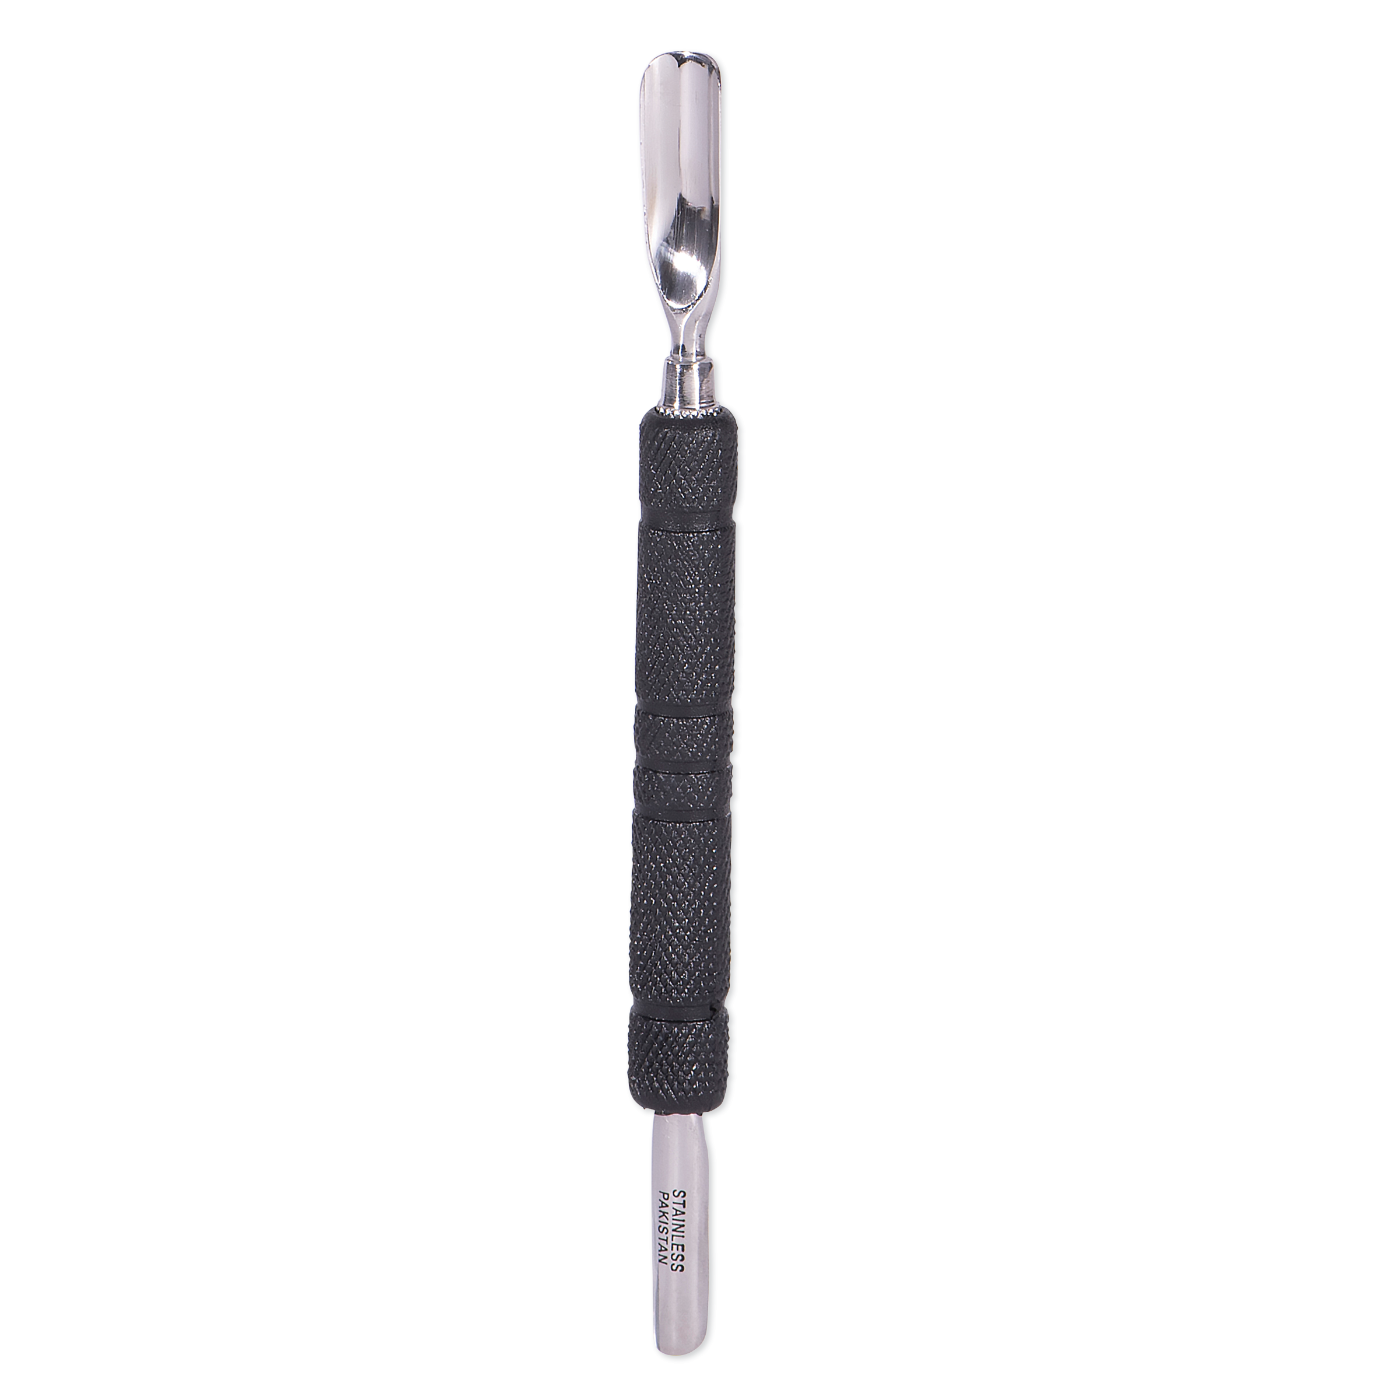 Cuticle Pusher with Rubber Grip, Double-ended